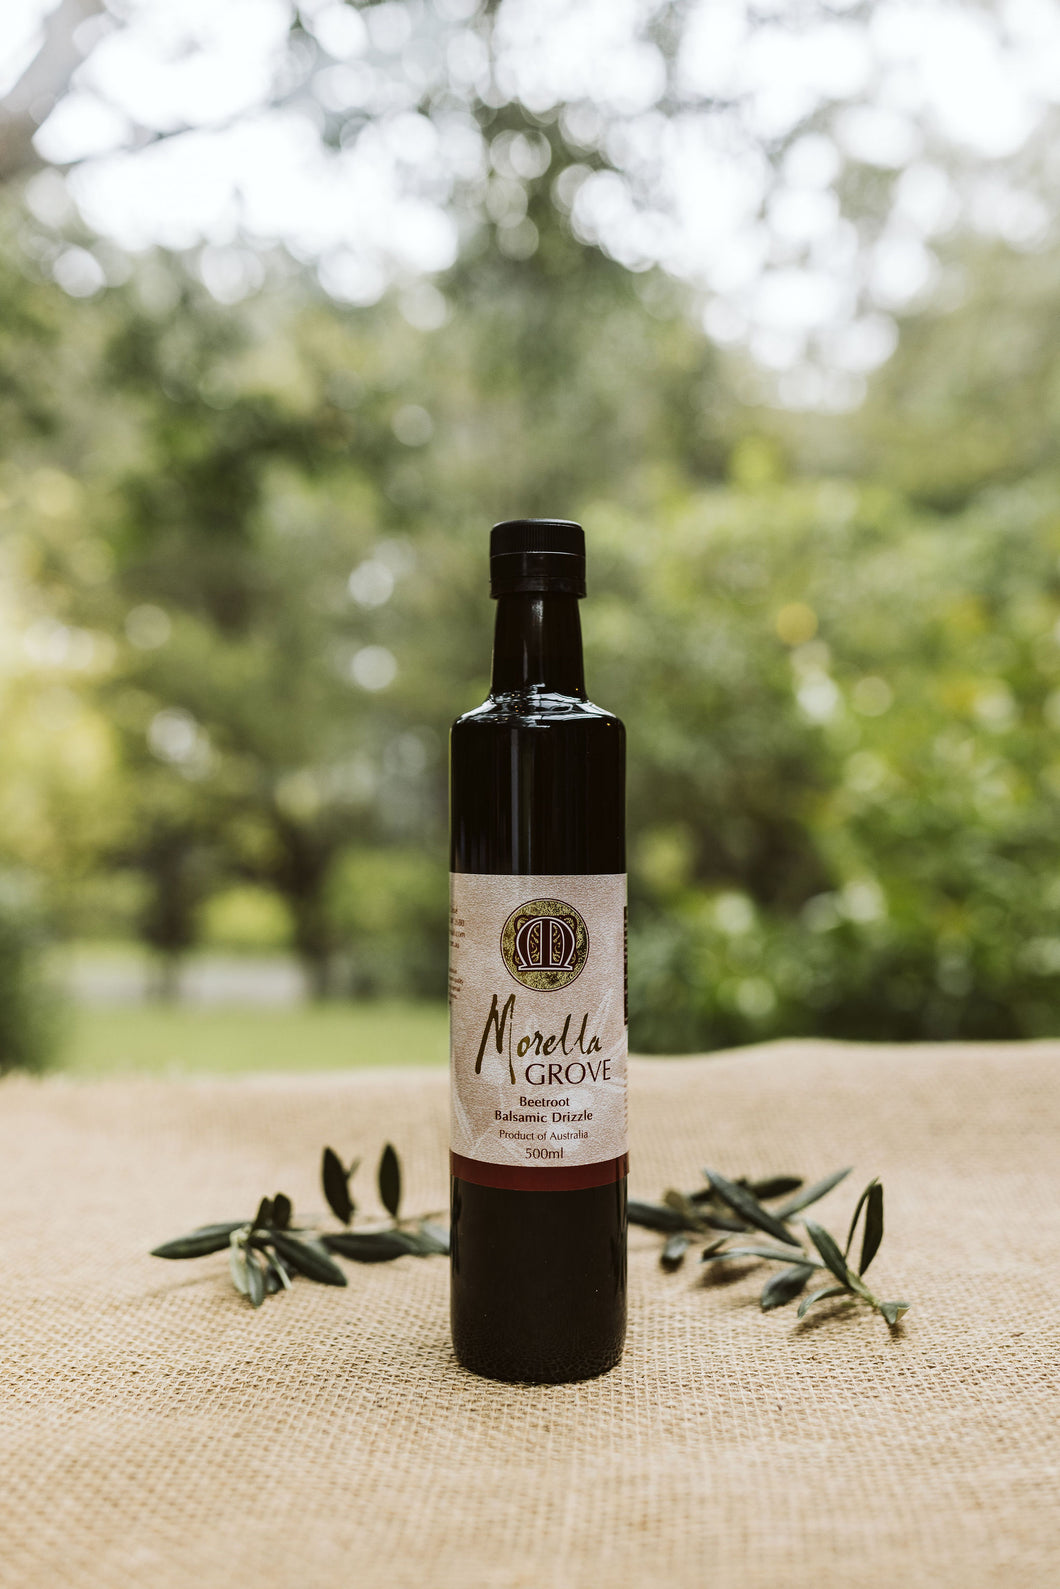 Beetroot Balsamic Drizzle 500ml